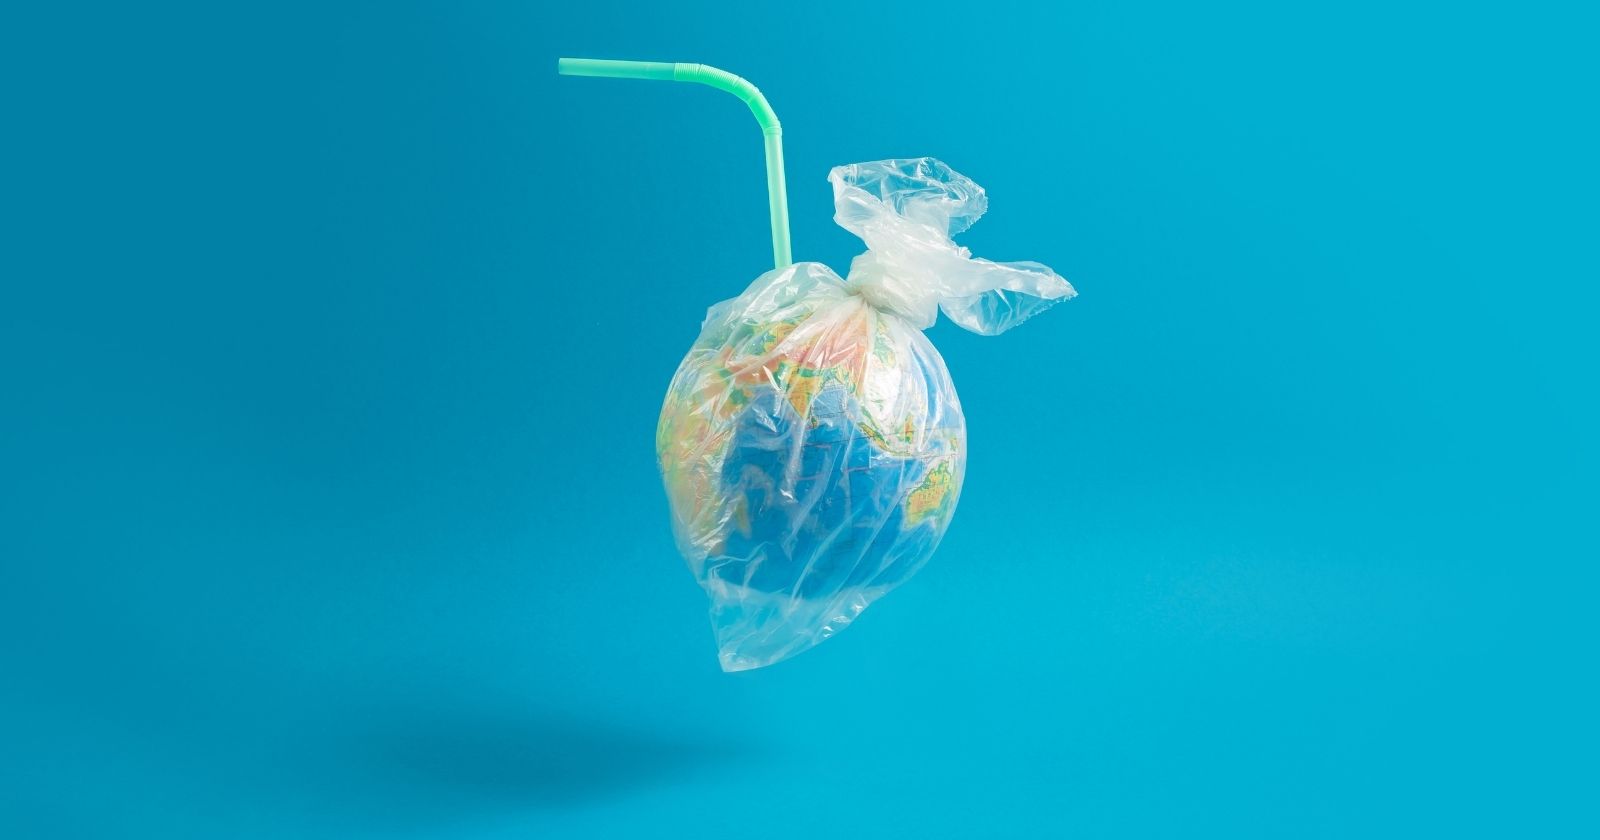 175 countries agree to find a "cure" for plastic pollution